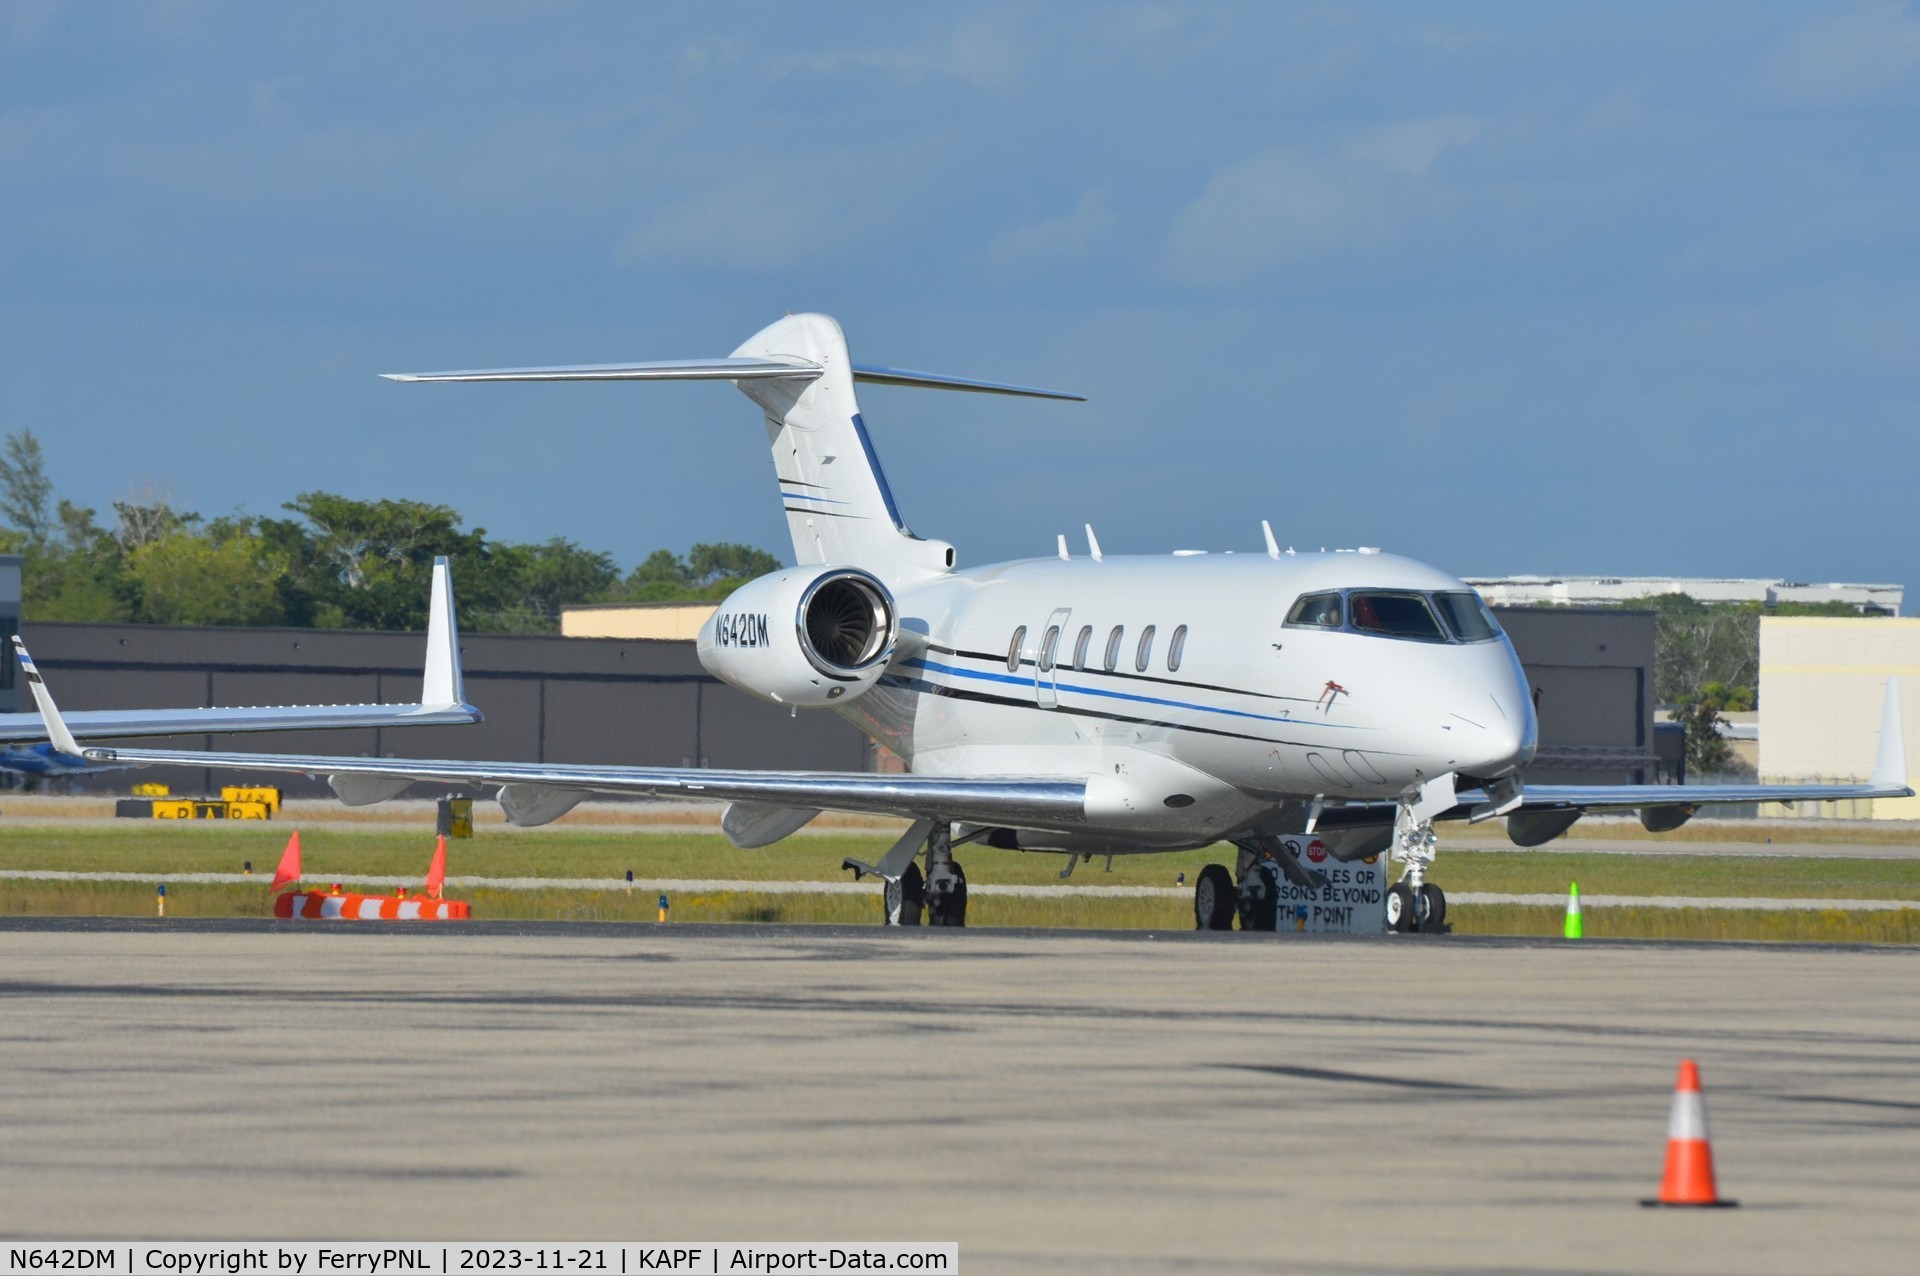 N642DM, 2008 Bombardier Challenger 300 C/N 20199, Miller Challenger CL300 on the tarmac in APF